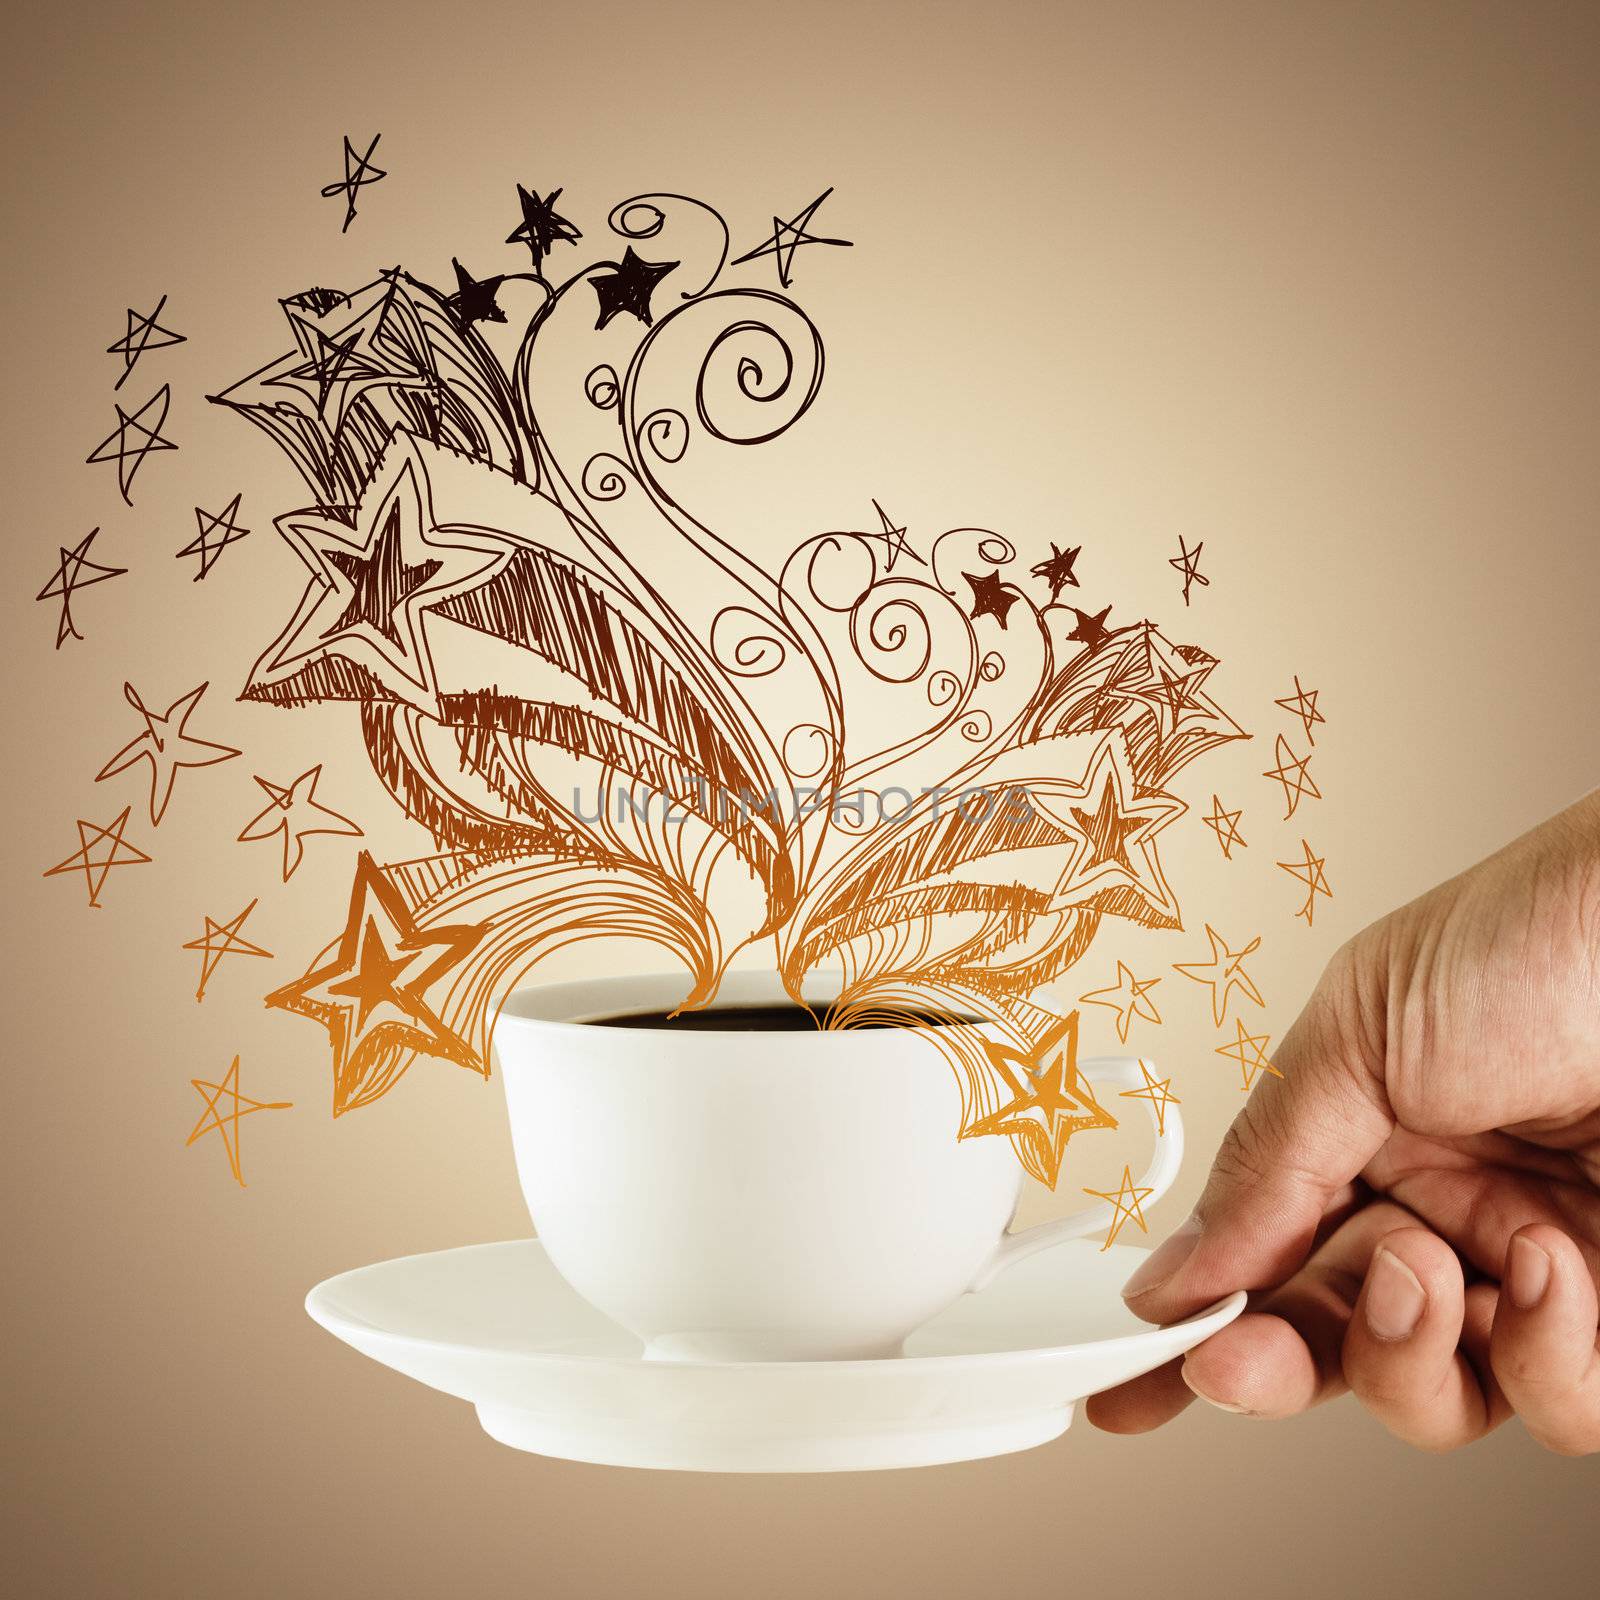 cup of coffee with golden hand drawn ornament